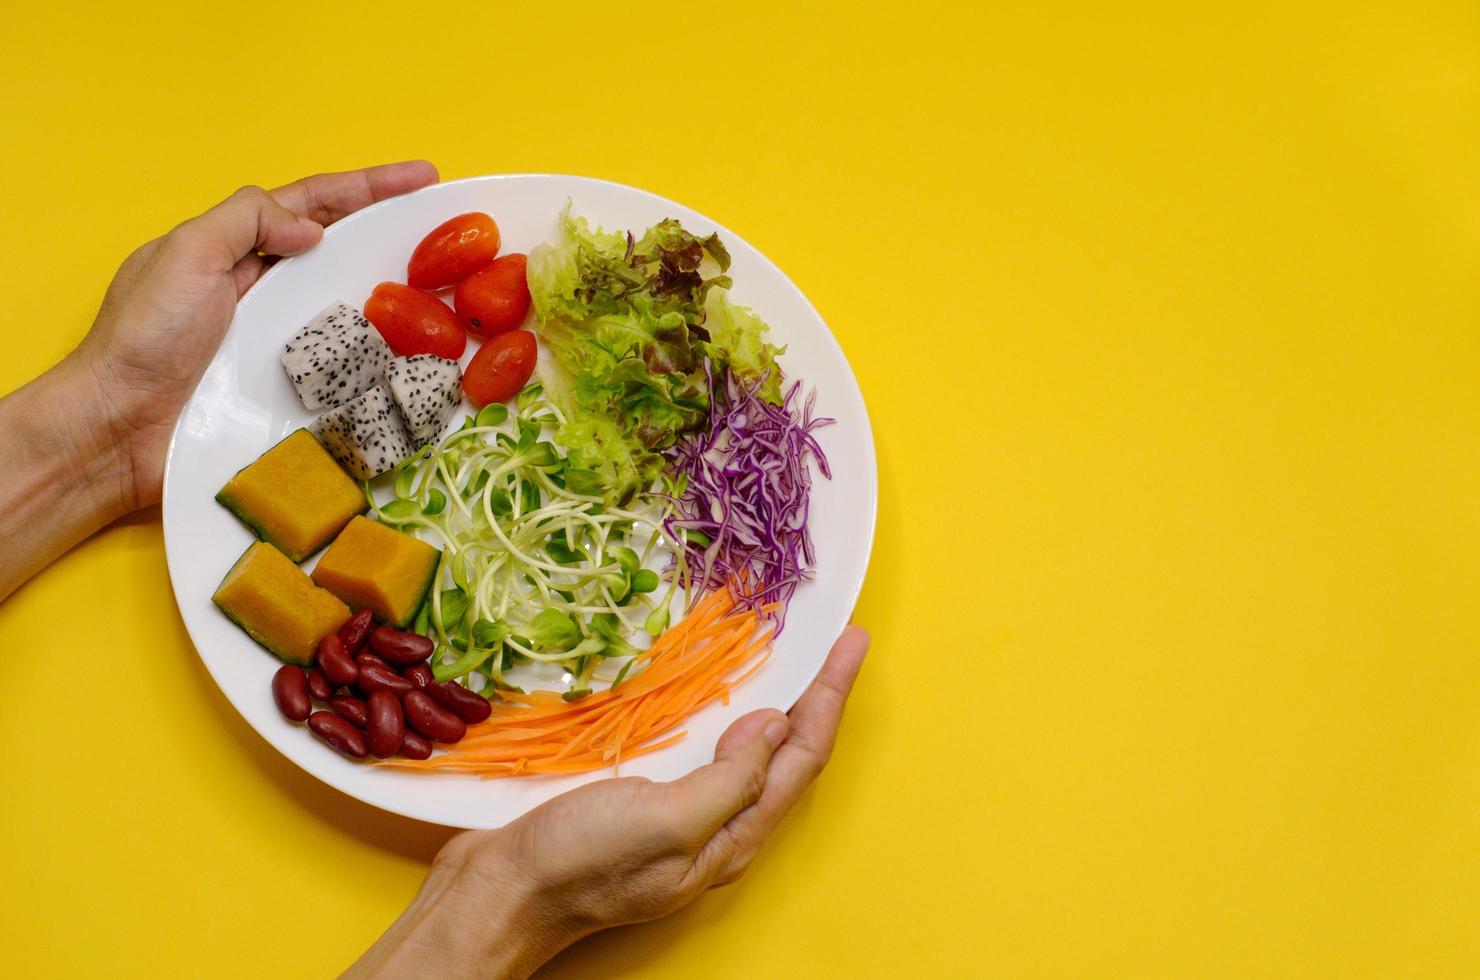 Hands holding a plate of Vegan salad on yellow background for Nine Emperor Gods Festival or Vegetarian festival in Thailand that celebrate for 9 days on eve of 9th lunar month of the Chinese calendar. photo